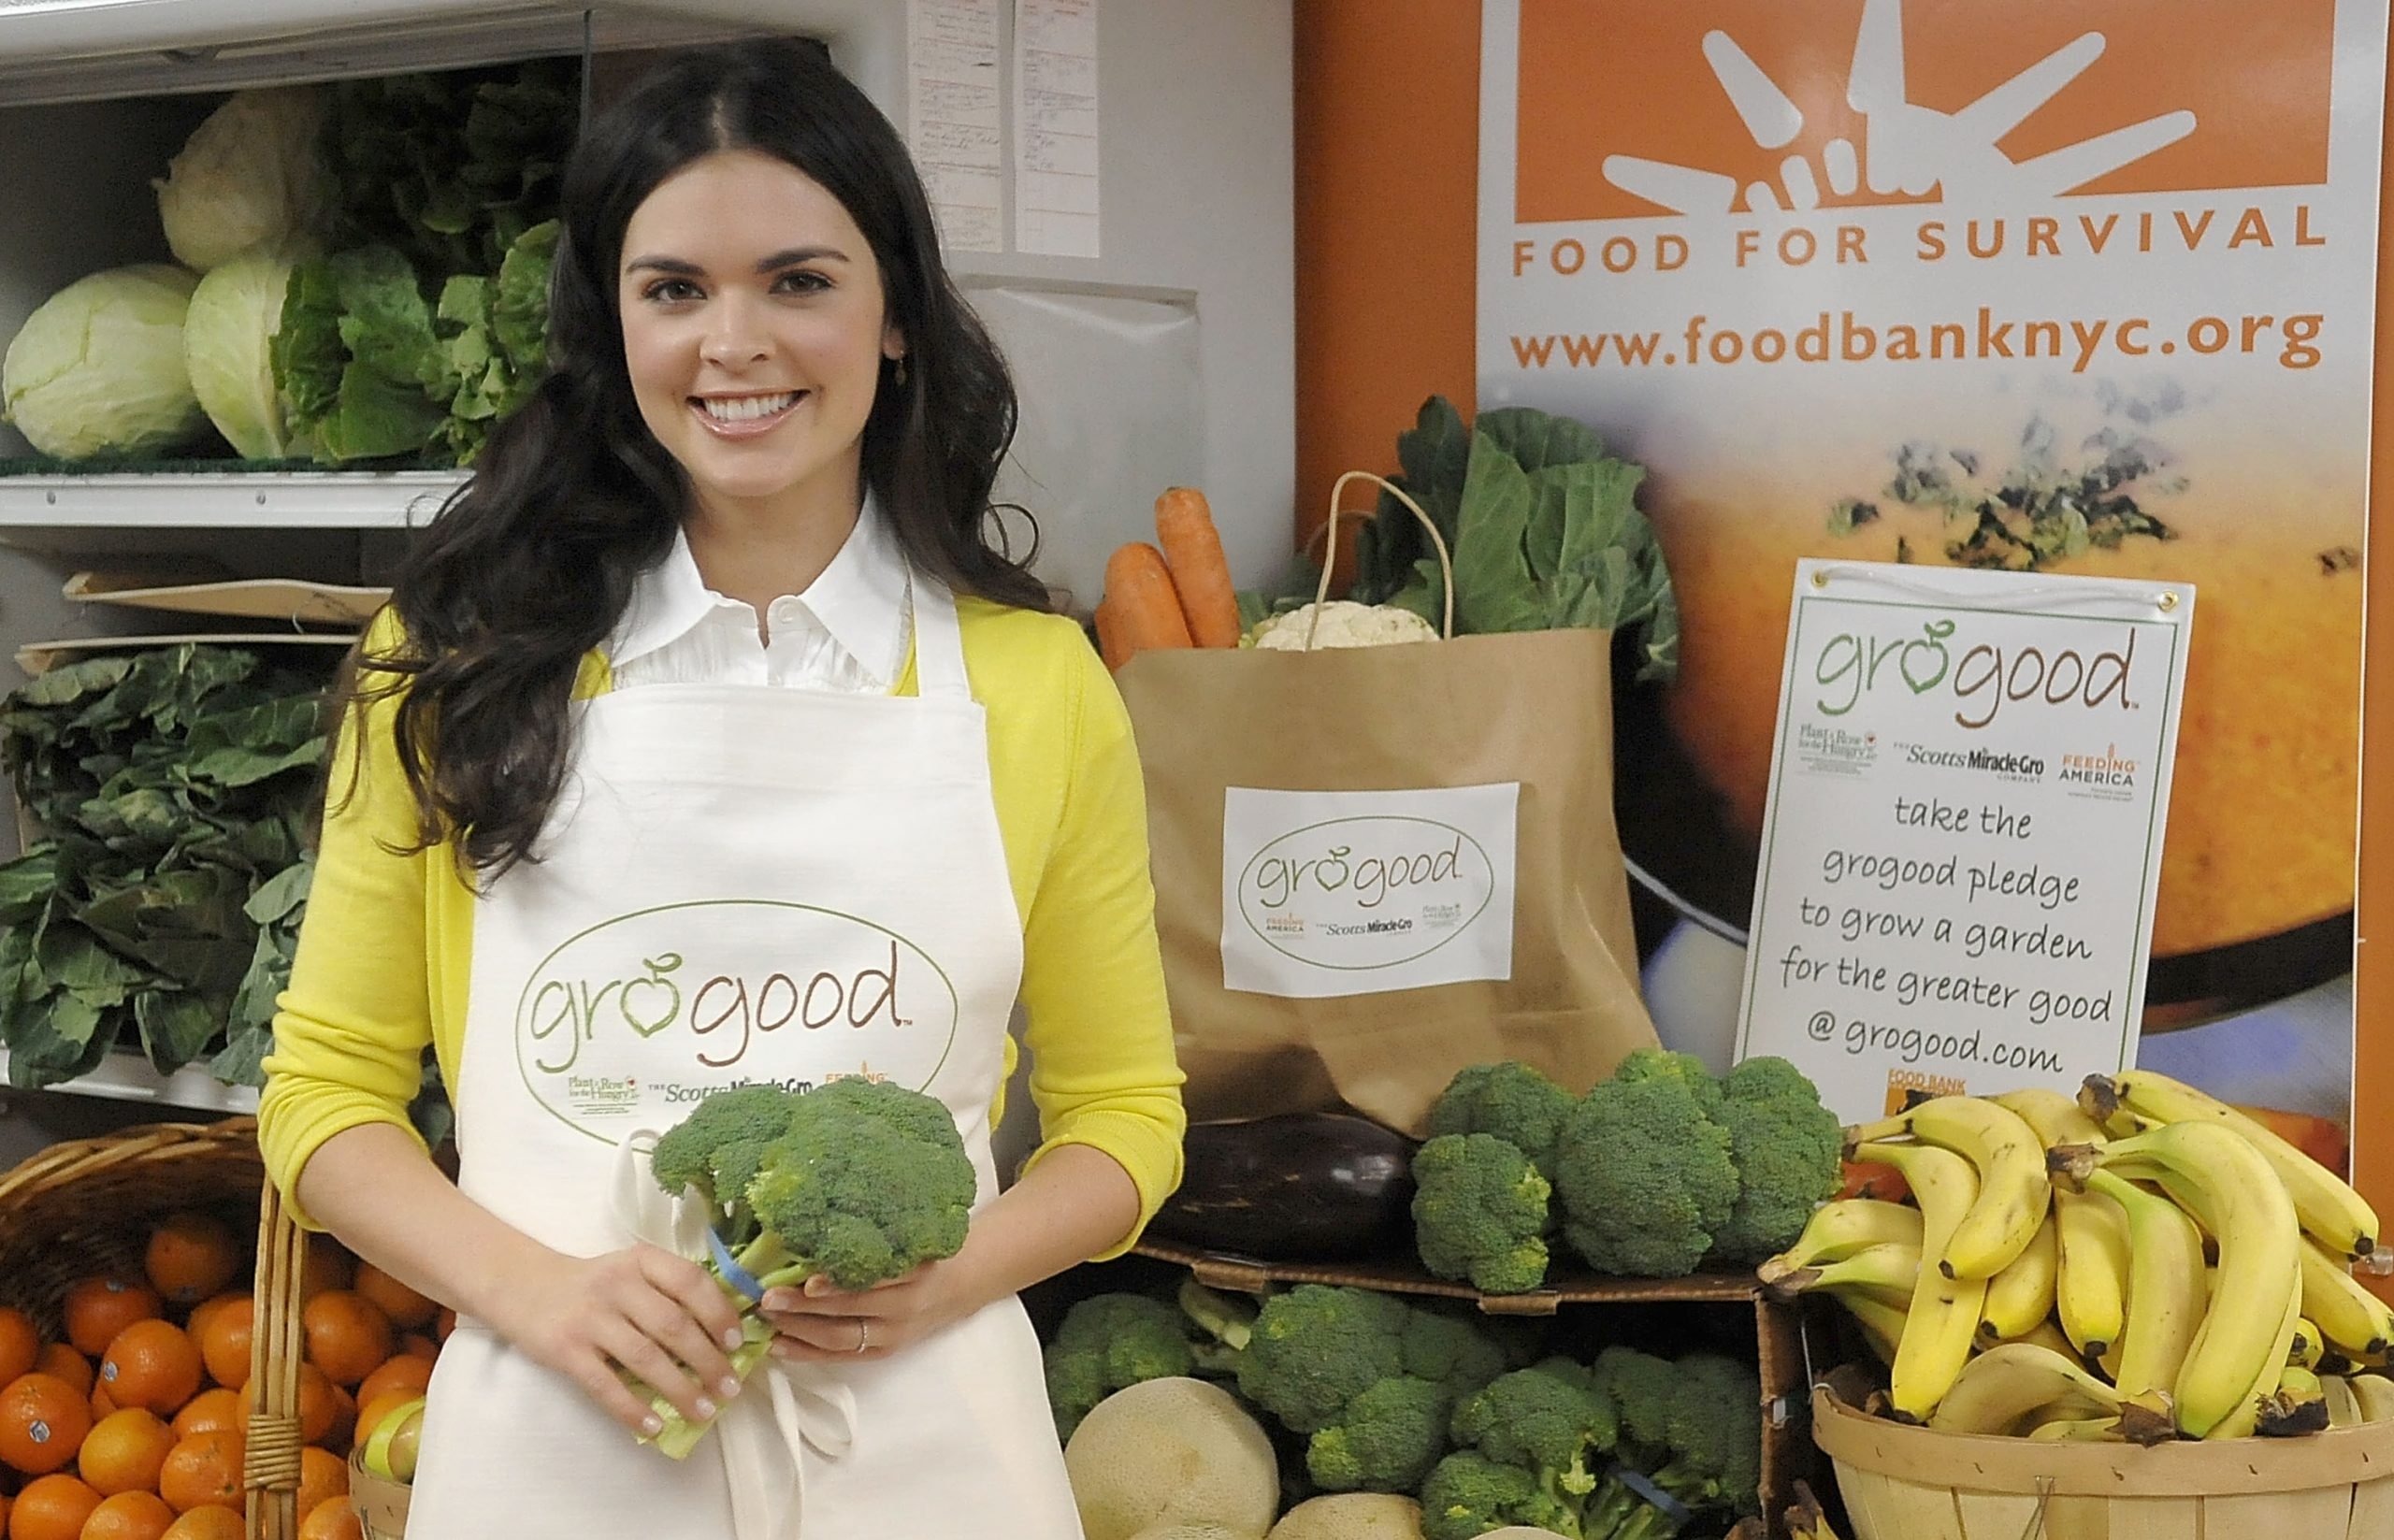 Celebrity chef Katie Lee Biegel wears a yellow blouse in this photograph.